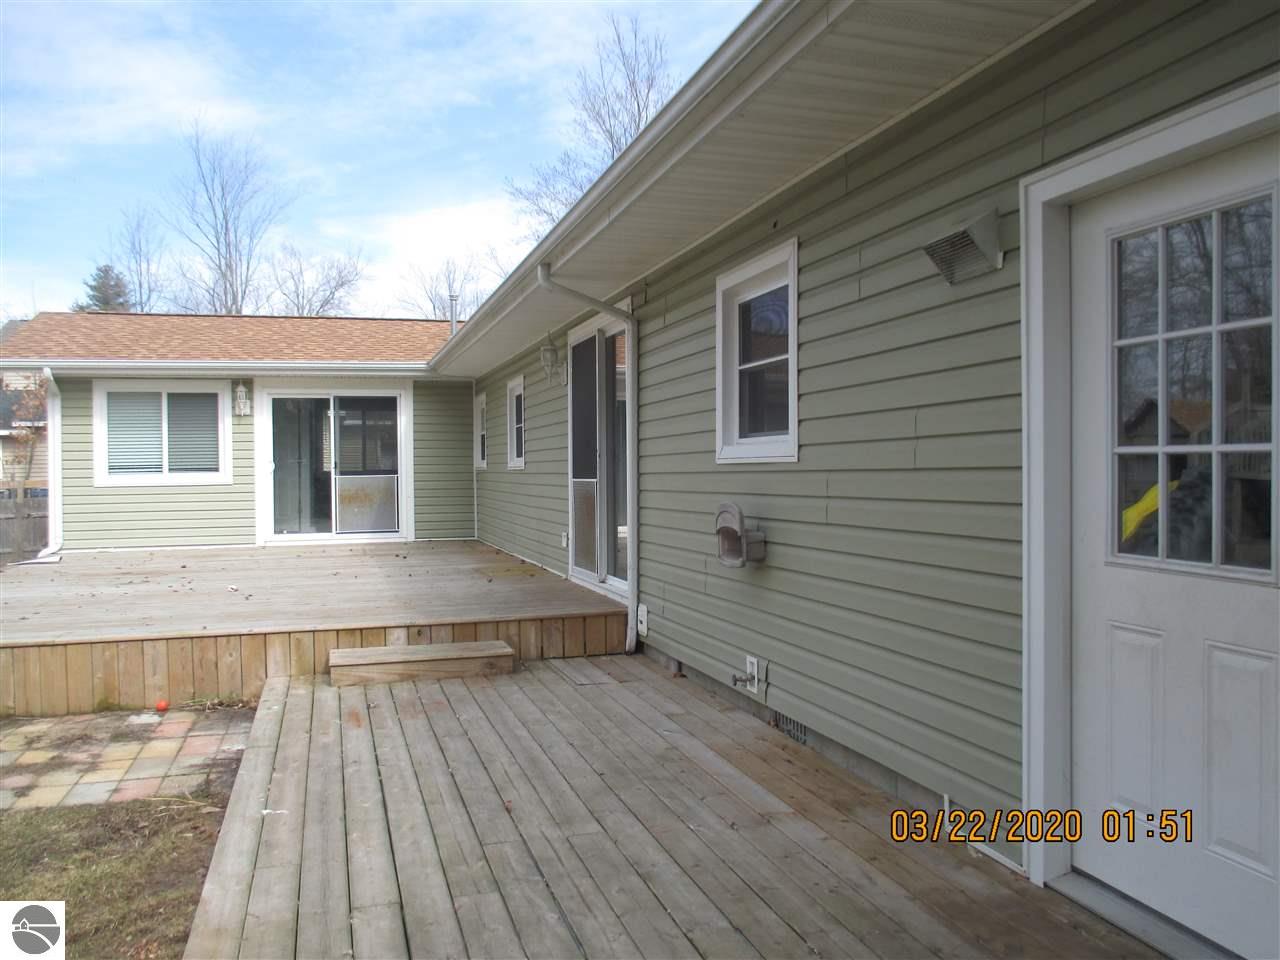 1029 Airport Drive, East Tawas, MI 48730 photo 33 of 36